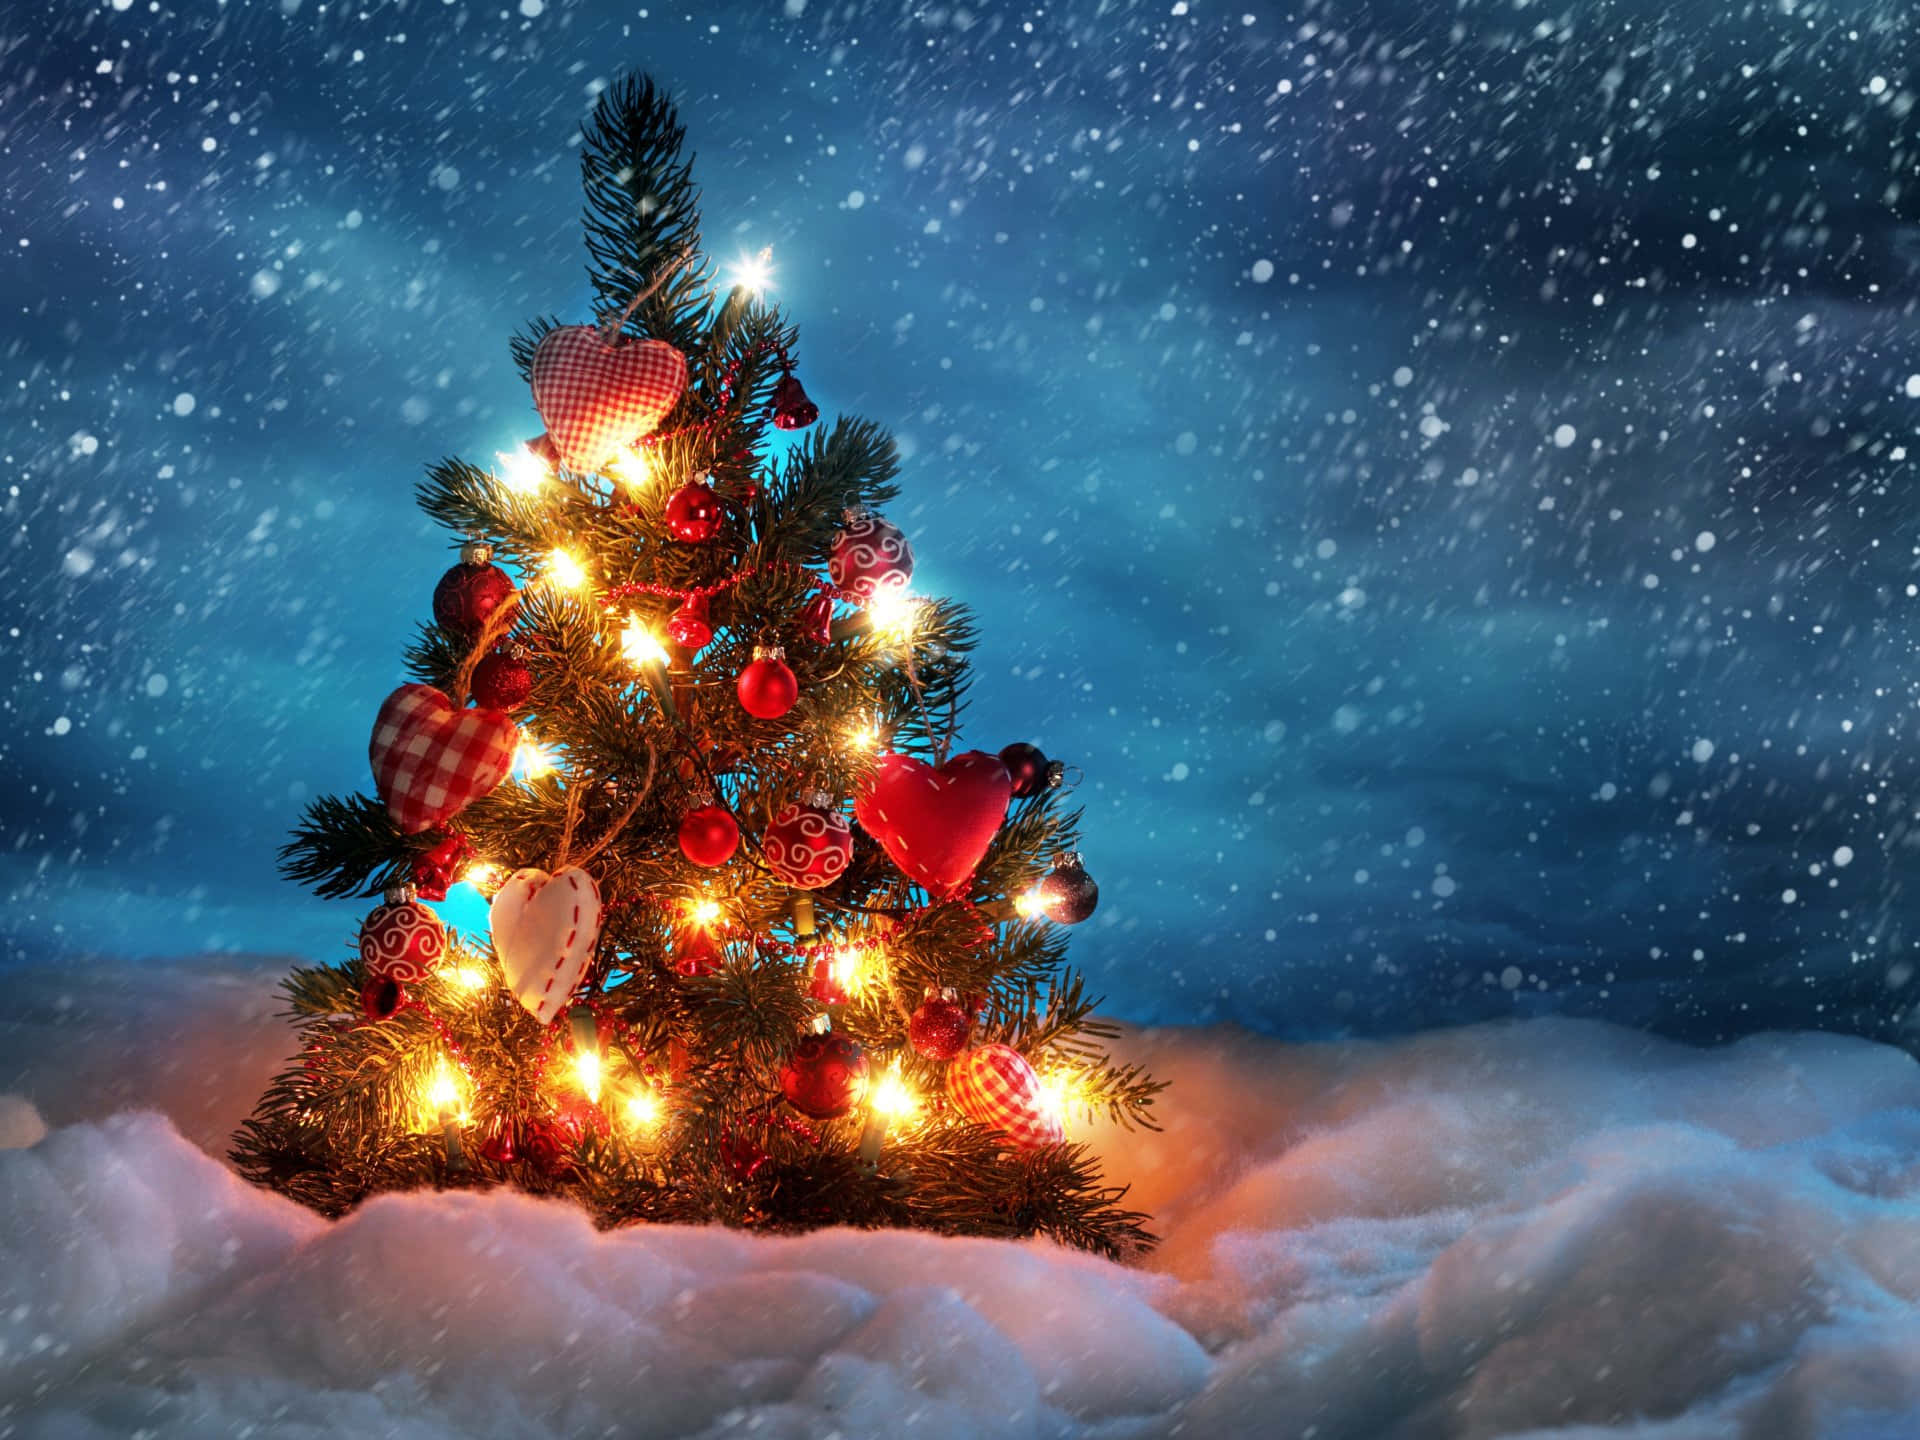 Image  Greeting the Holidays with a Christmas-Themed PC Wallpaper